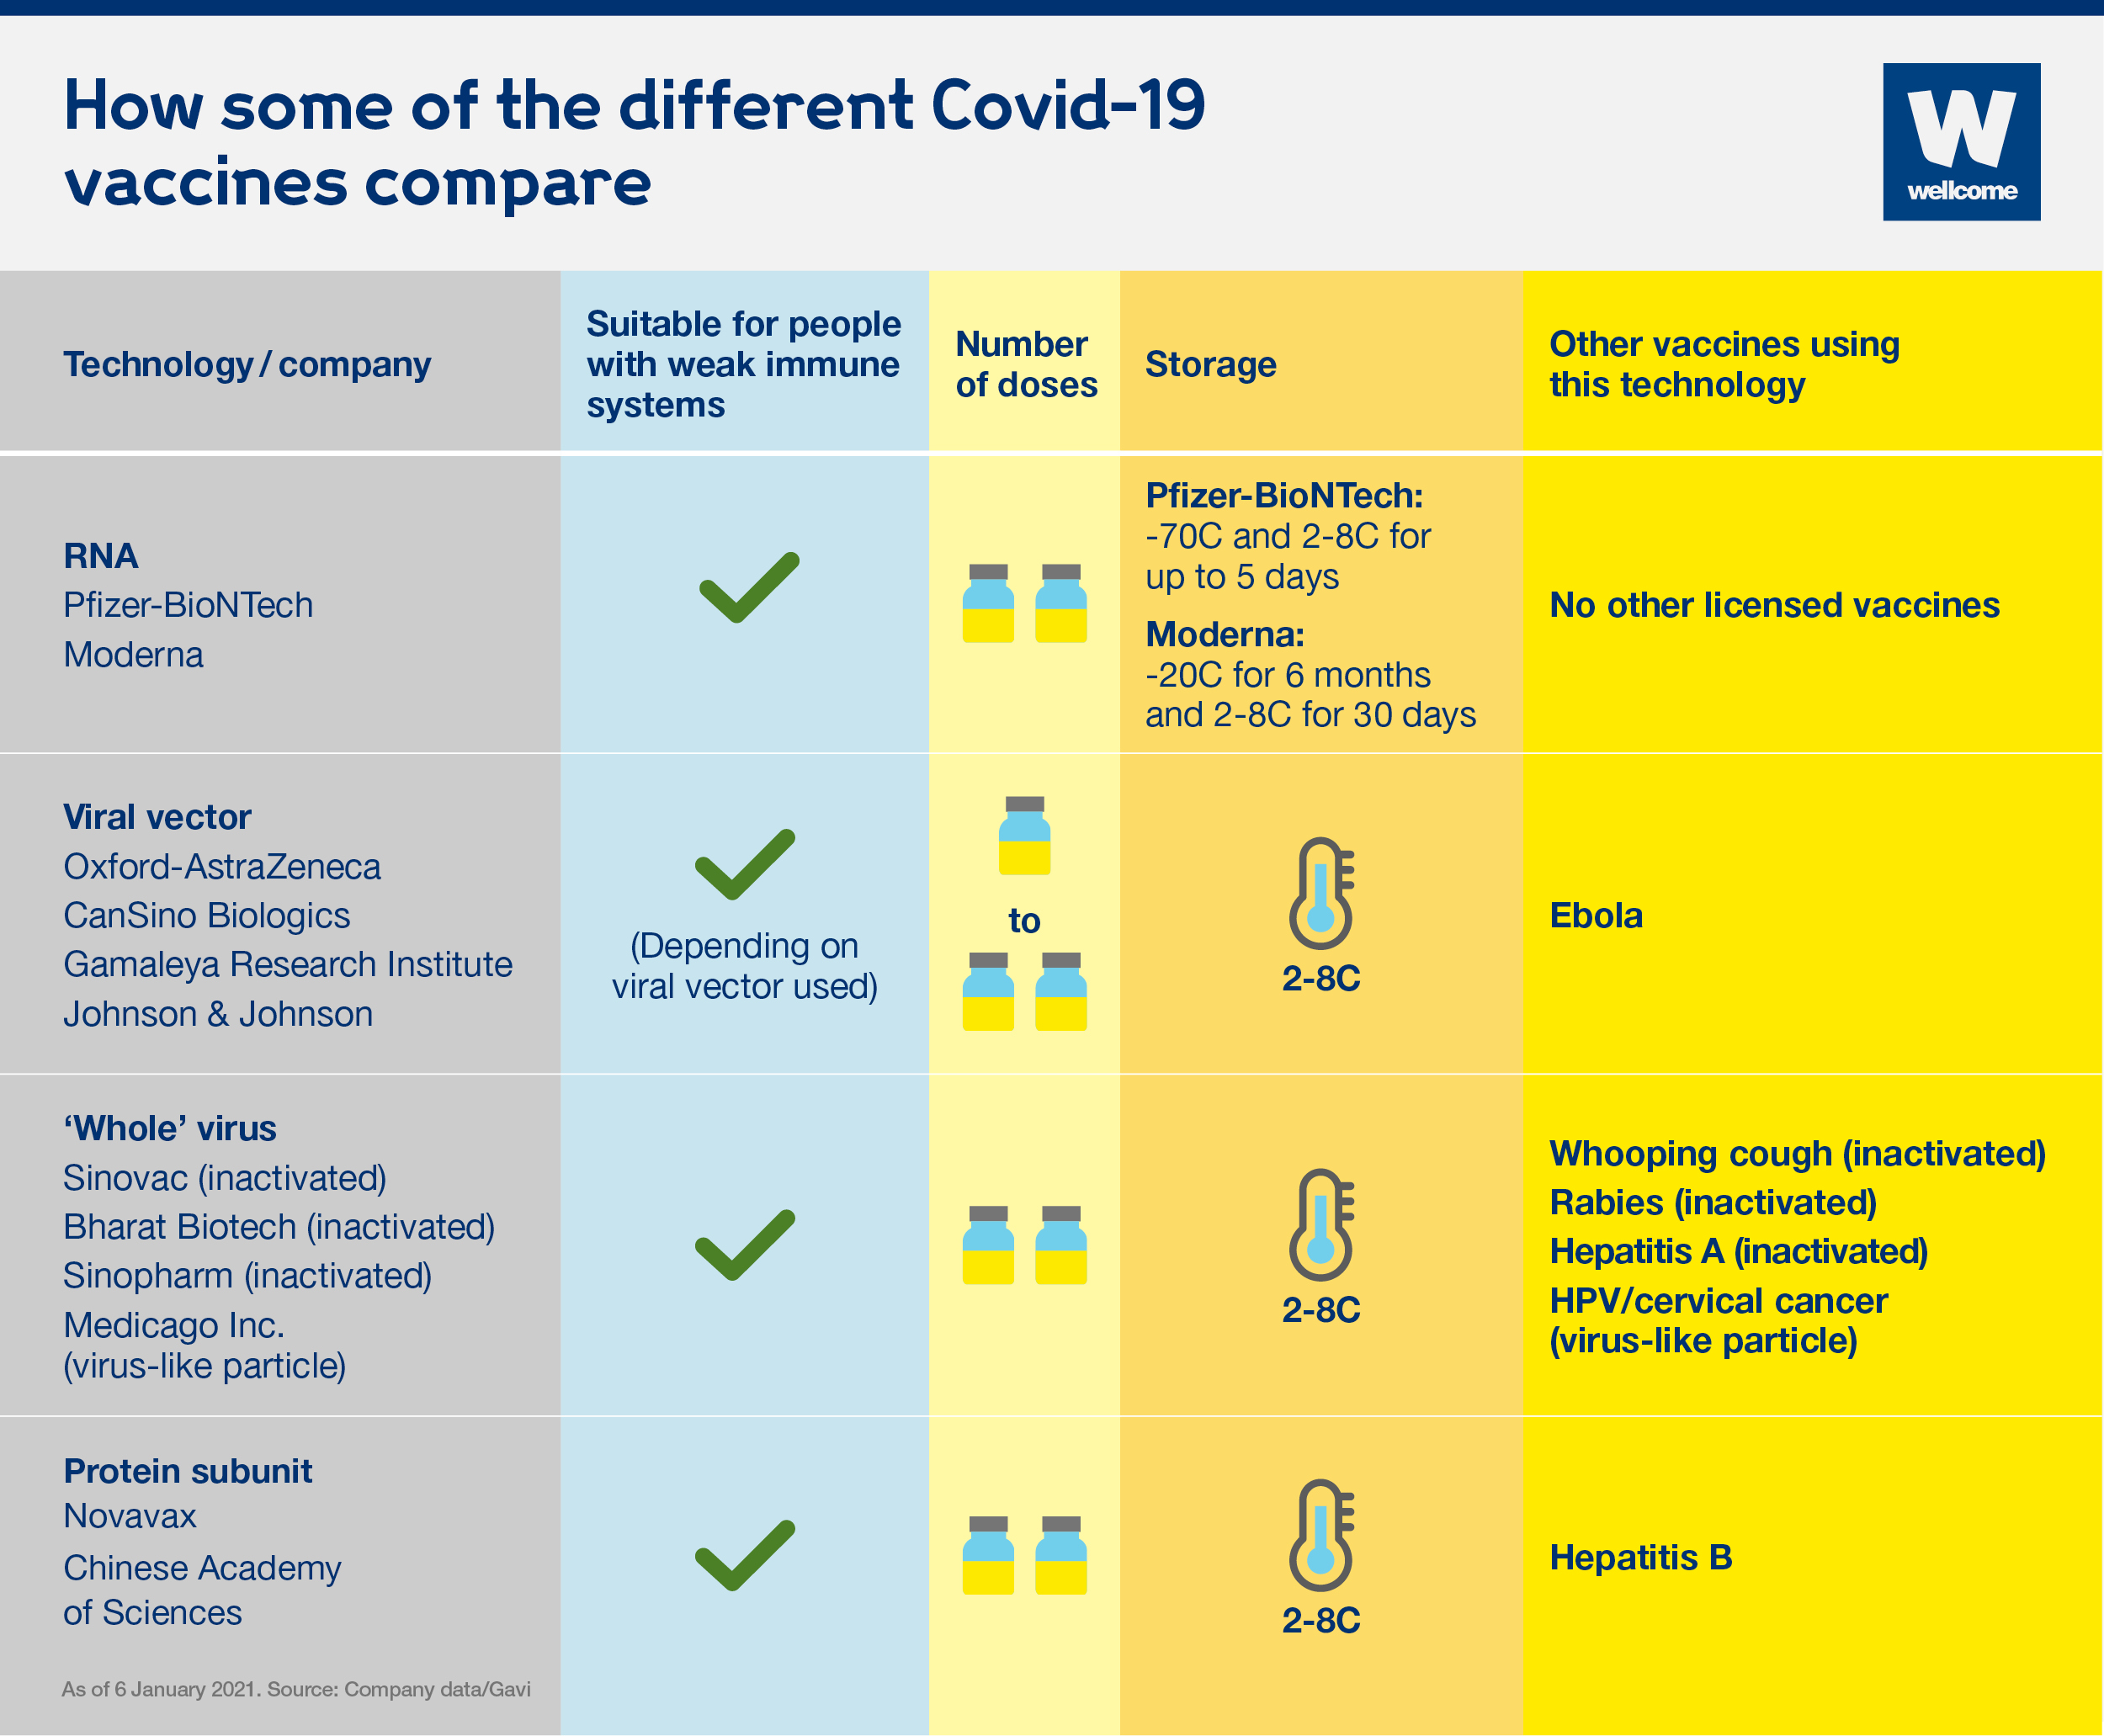 Table showing how some of the different Covid-19 vaccines compare.